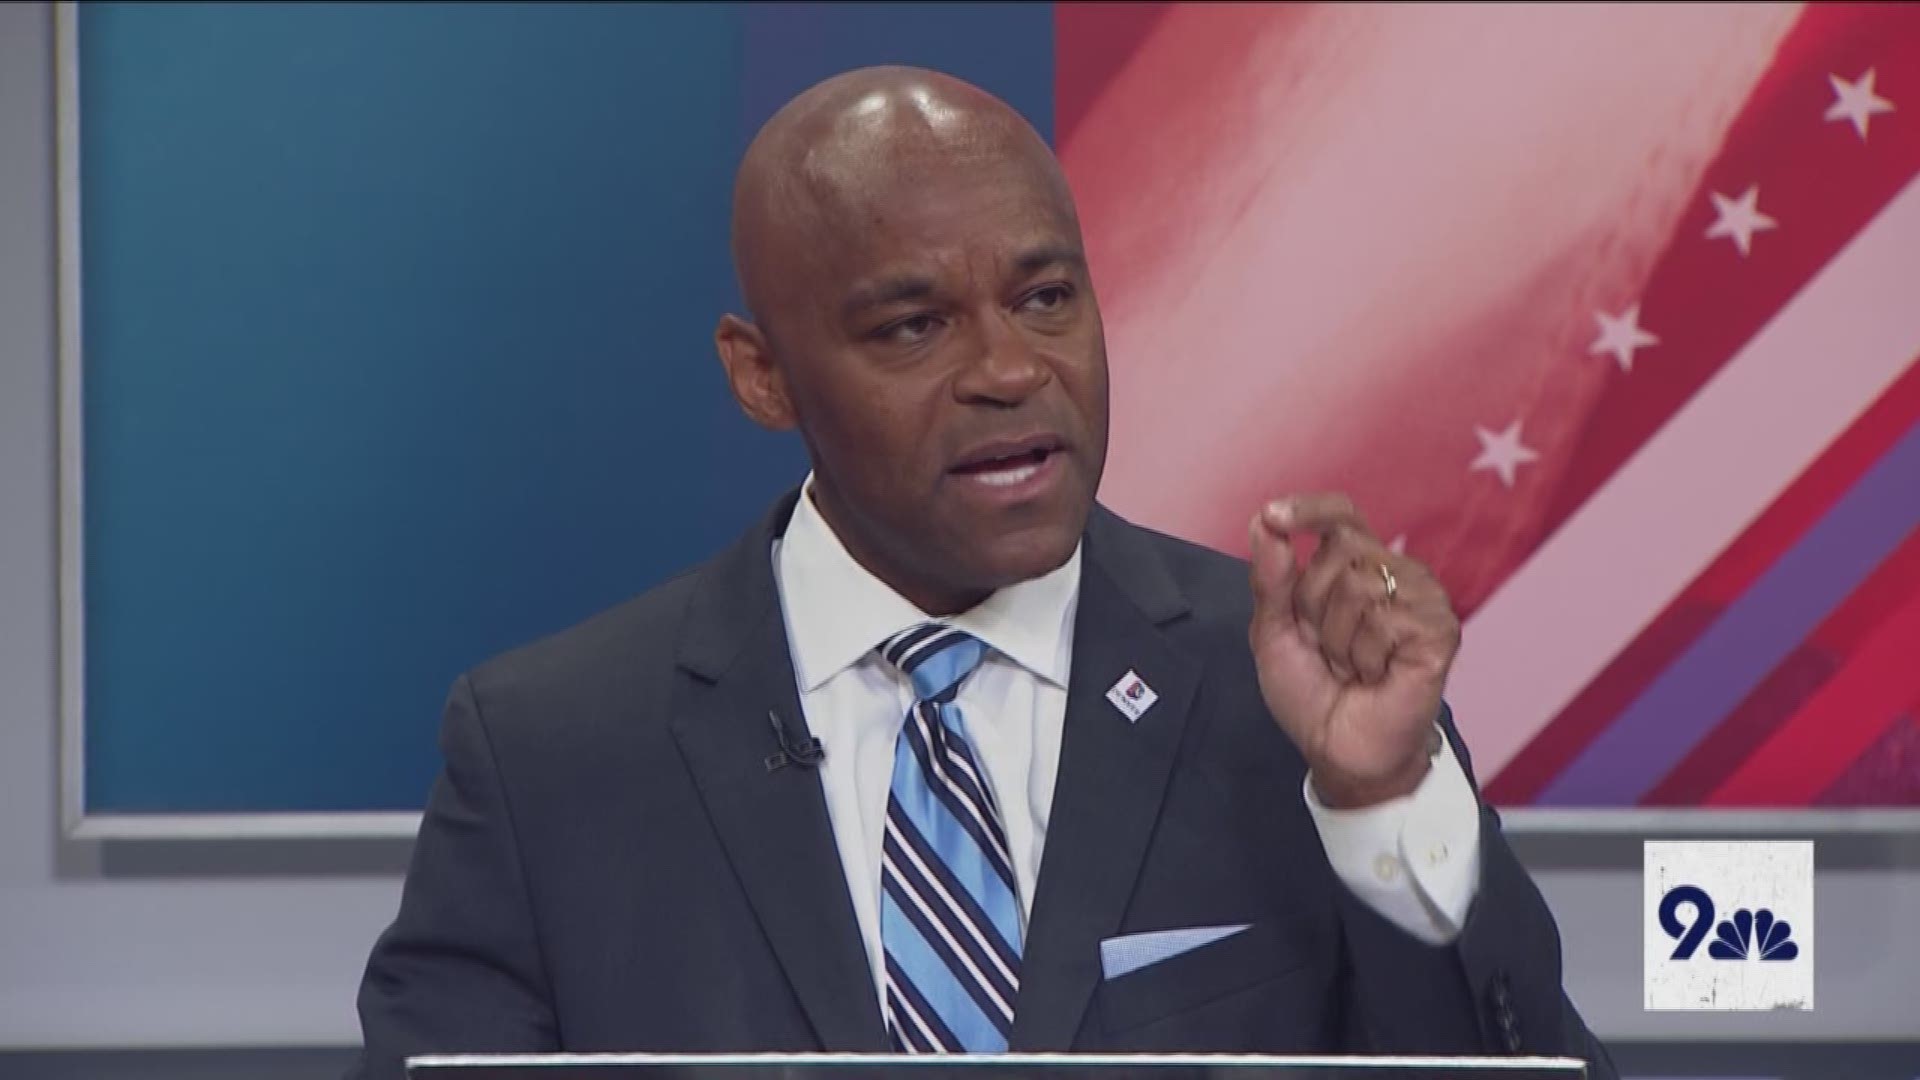 Incumbent Mayor Michael Hancock discusses whether he thinks Jamie Giellis is prepared to be mayor during a 9NEWS mayoral debate ahead of the June 4 runoff election.